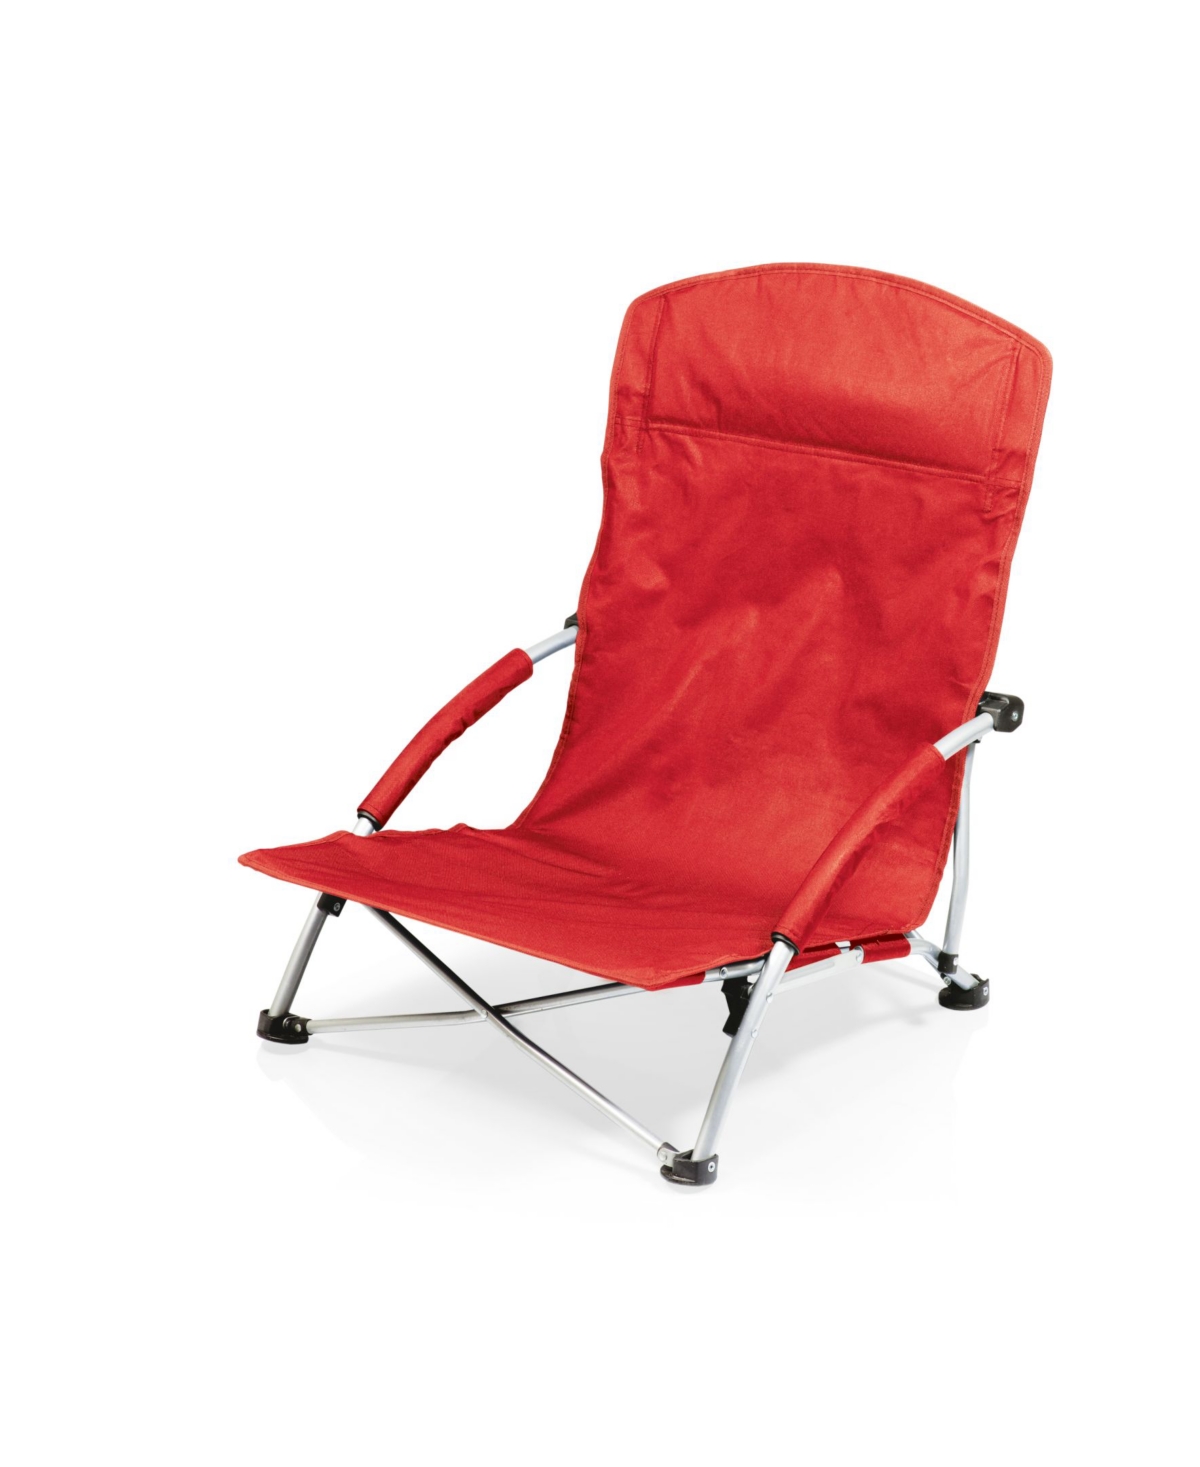 "The Beach Is Where I Belong" Tranquility Portable Beach Chair - Red